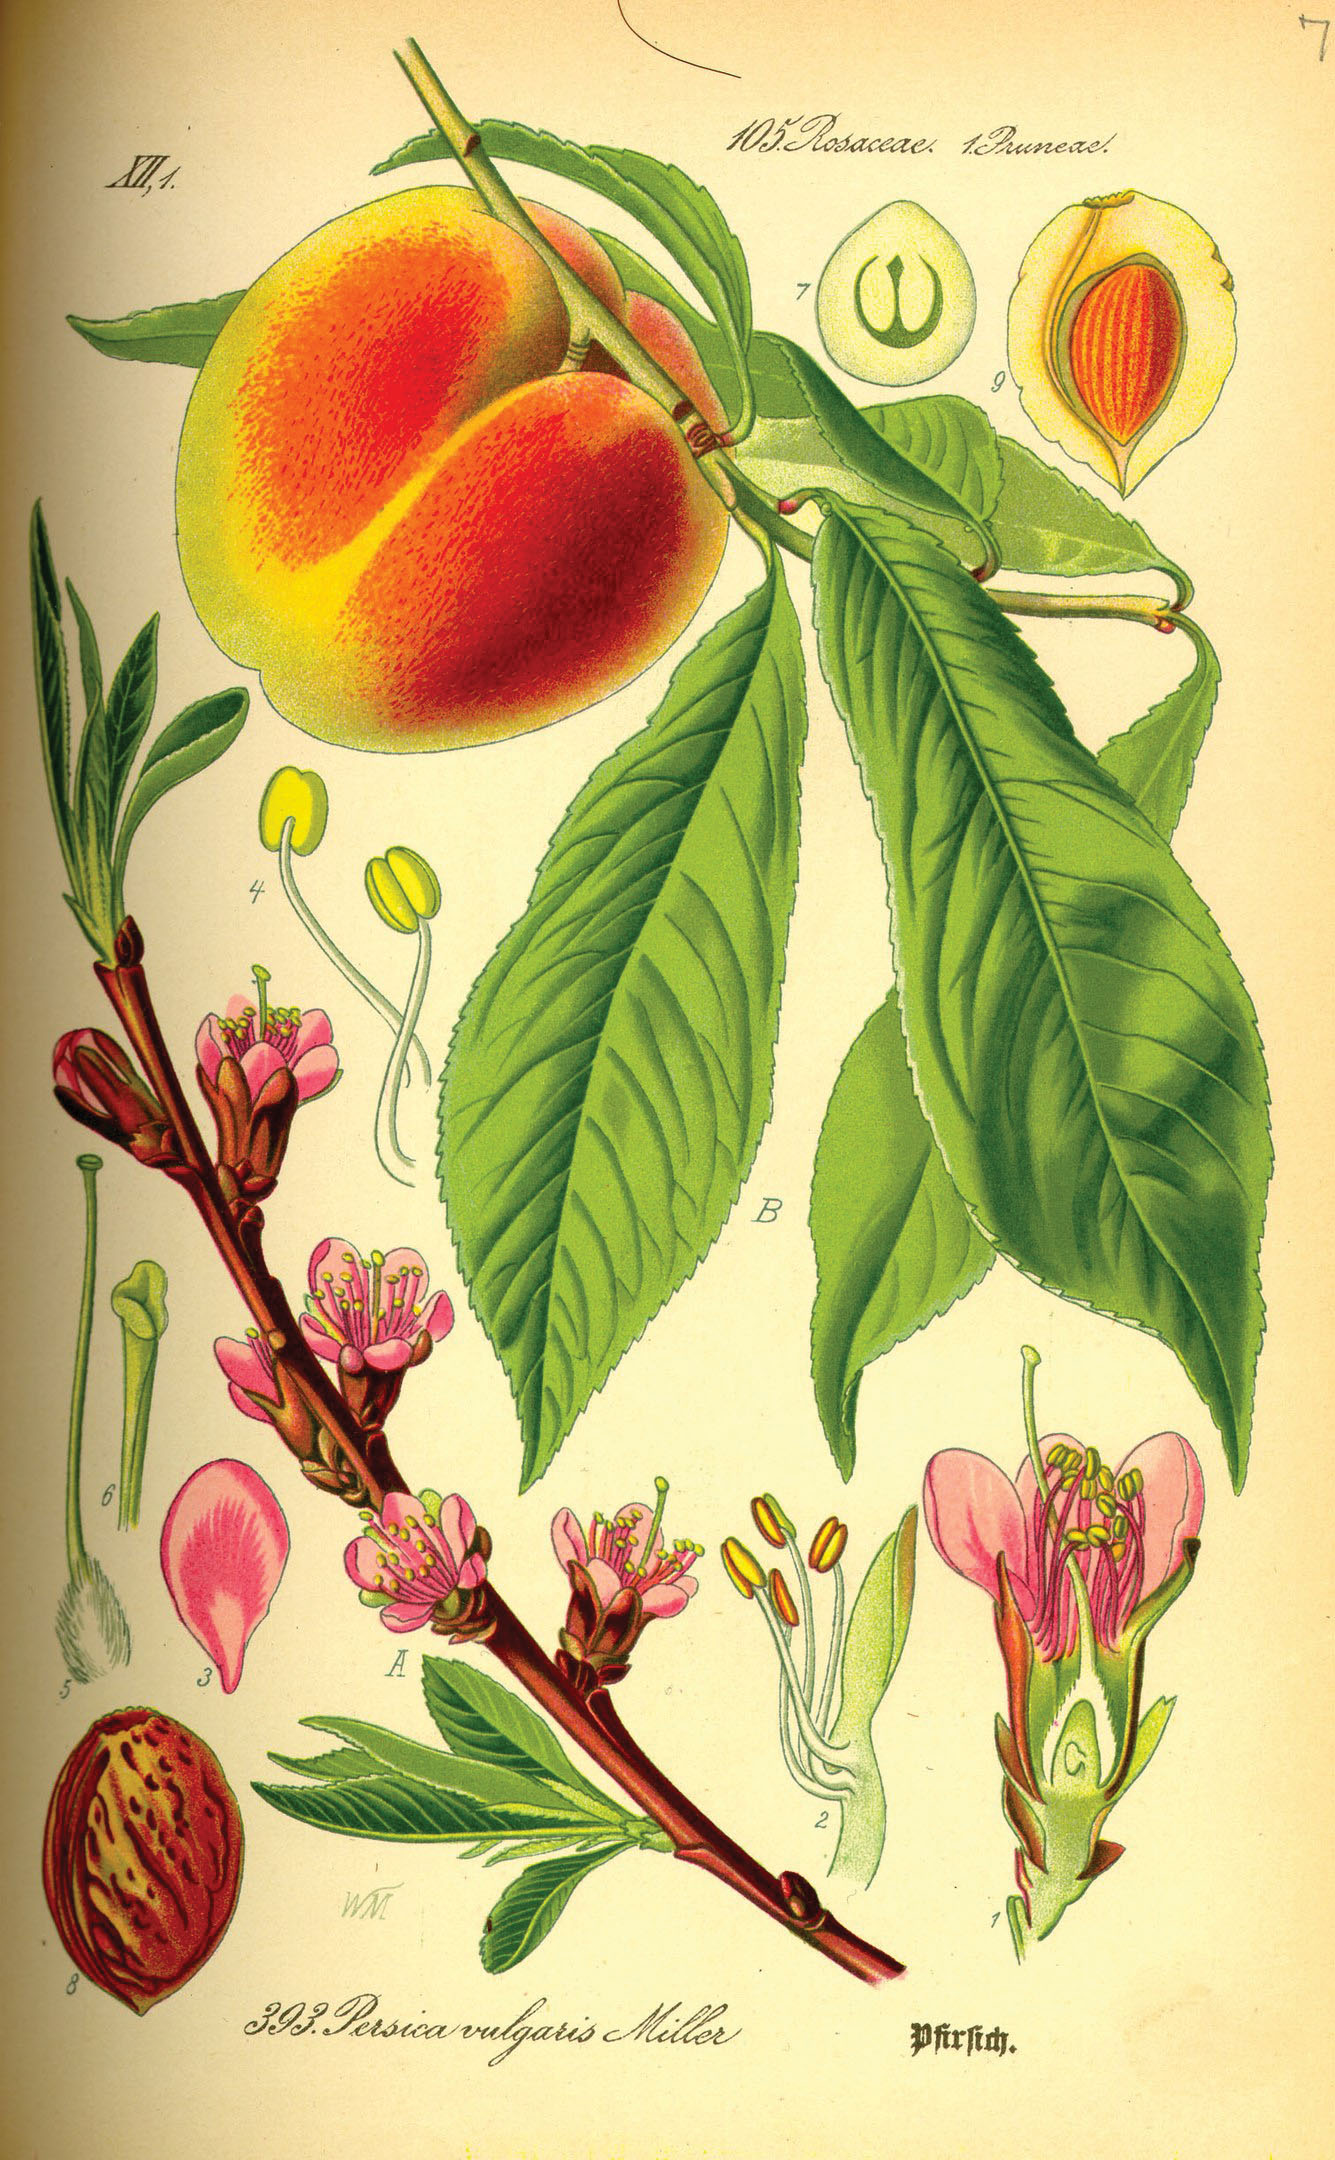 Peach flower, fruit, seed, and leaves as illustrated by Otto Wilhelm Thomé (1885).